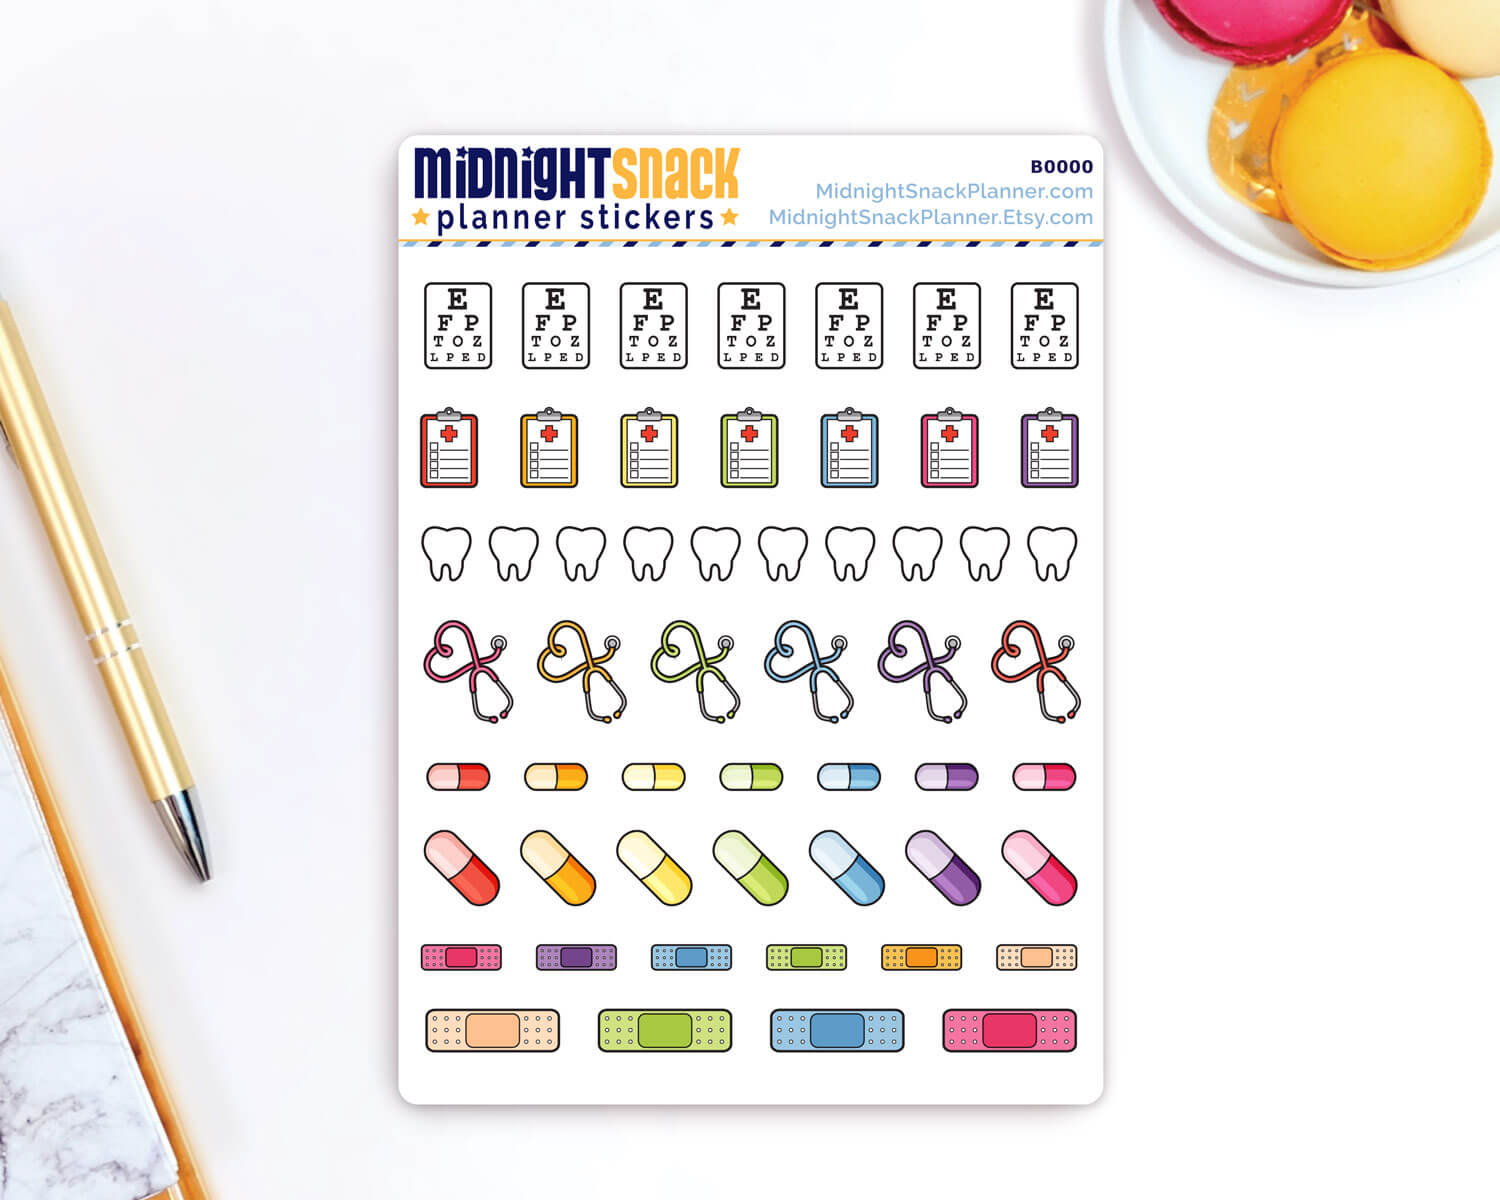 Health and Wellness Sampler Planner Stickers from Midnight Snack Planner